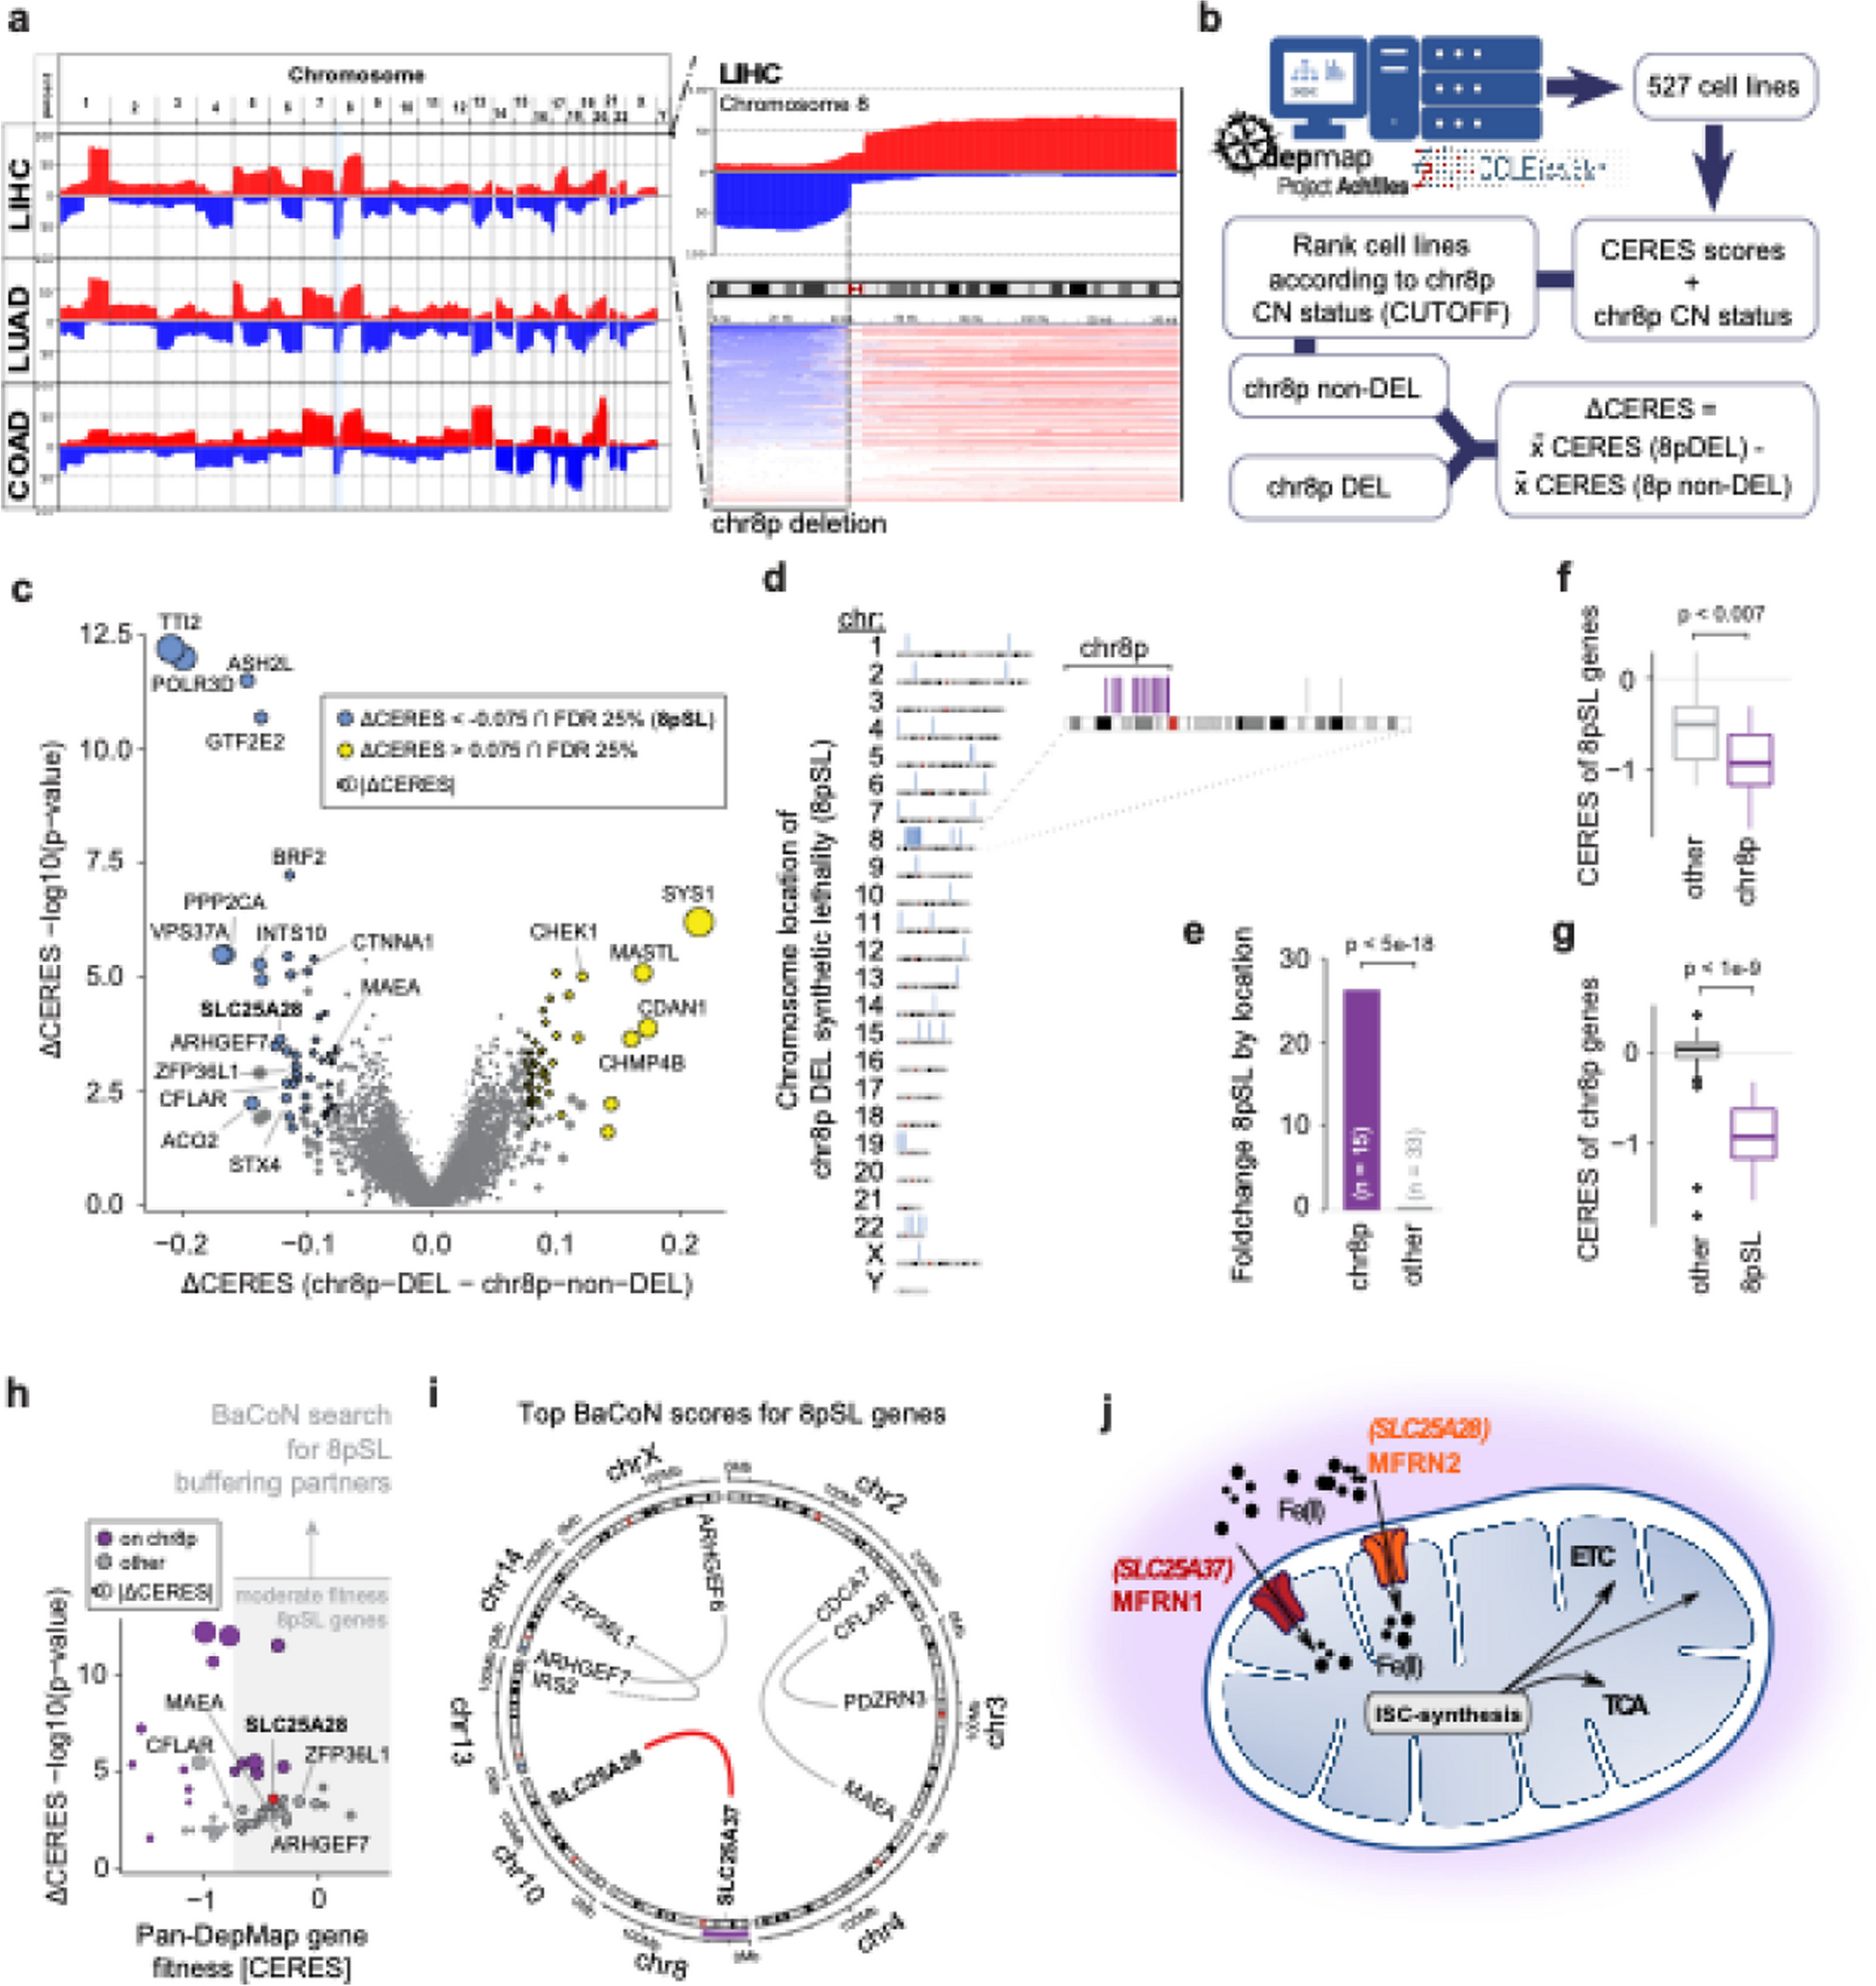 Mitoferrin2 is a synthetic lethal target for chromosome 8p deleted cancers